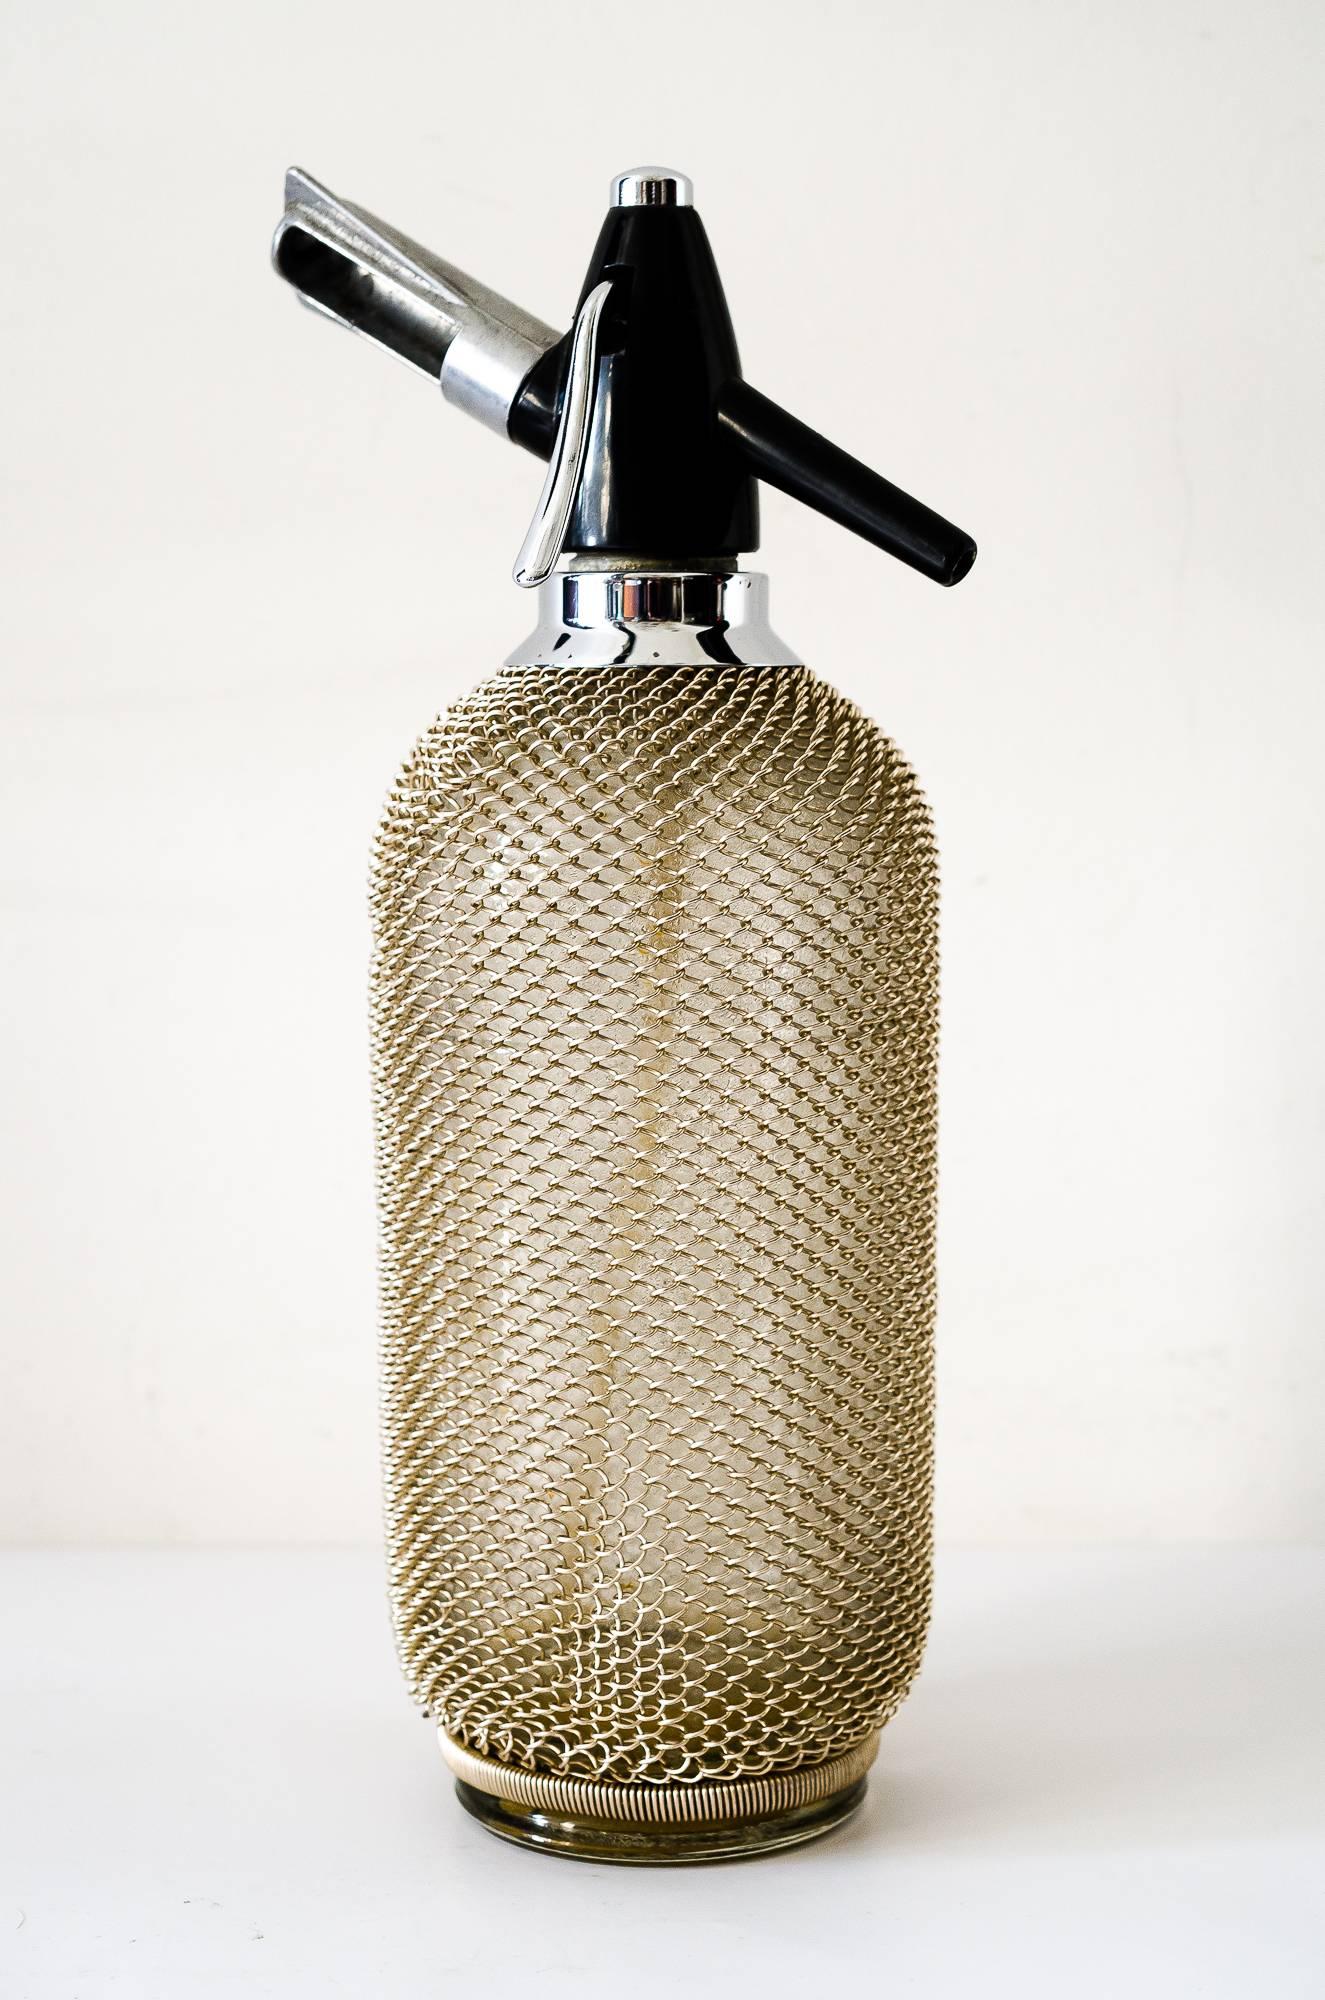 Soda siphon seltzer bottle with wire mesh metal
Original condition.